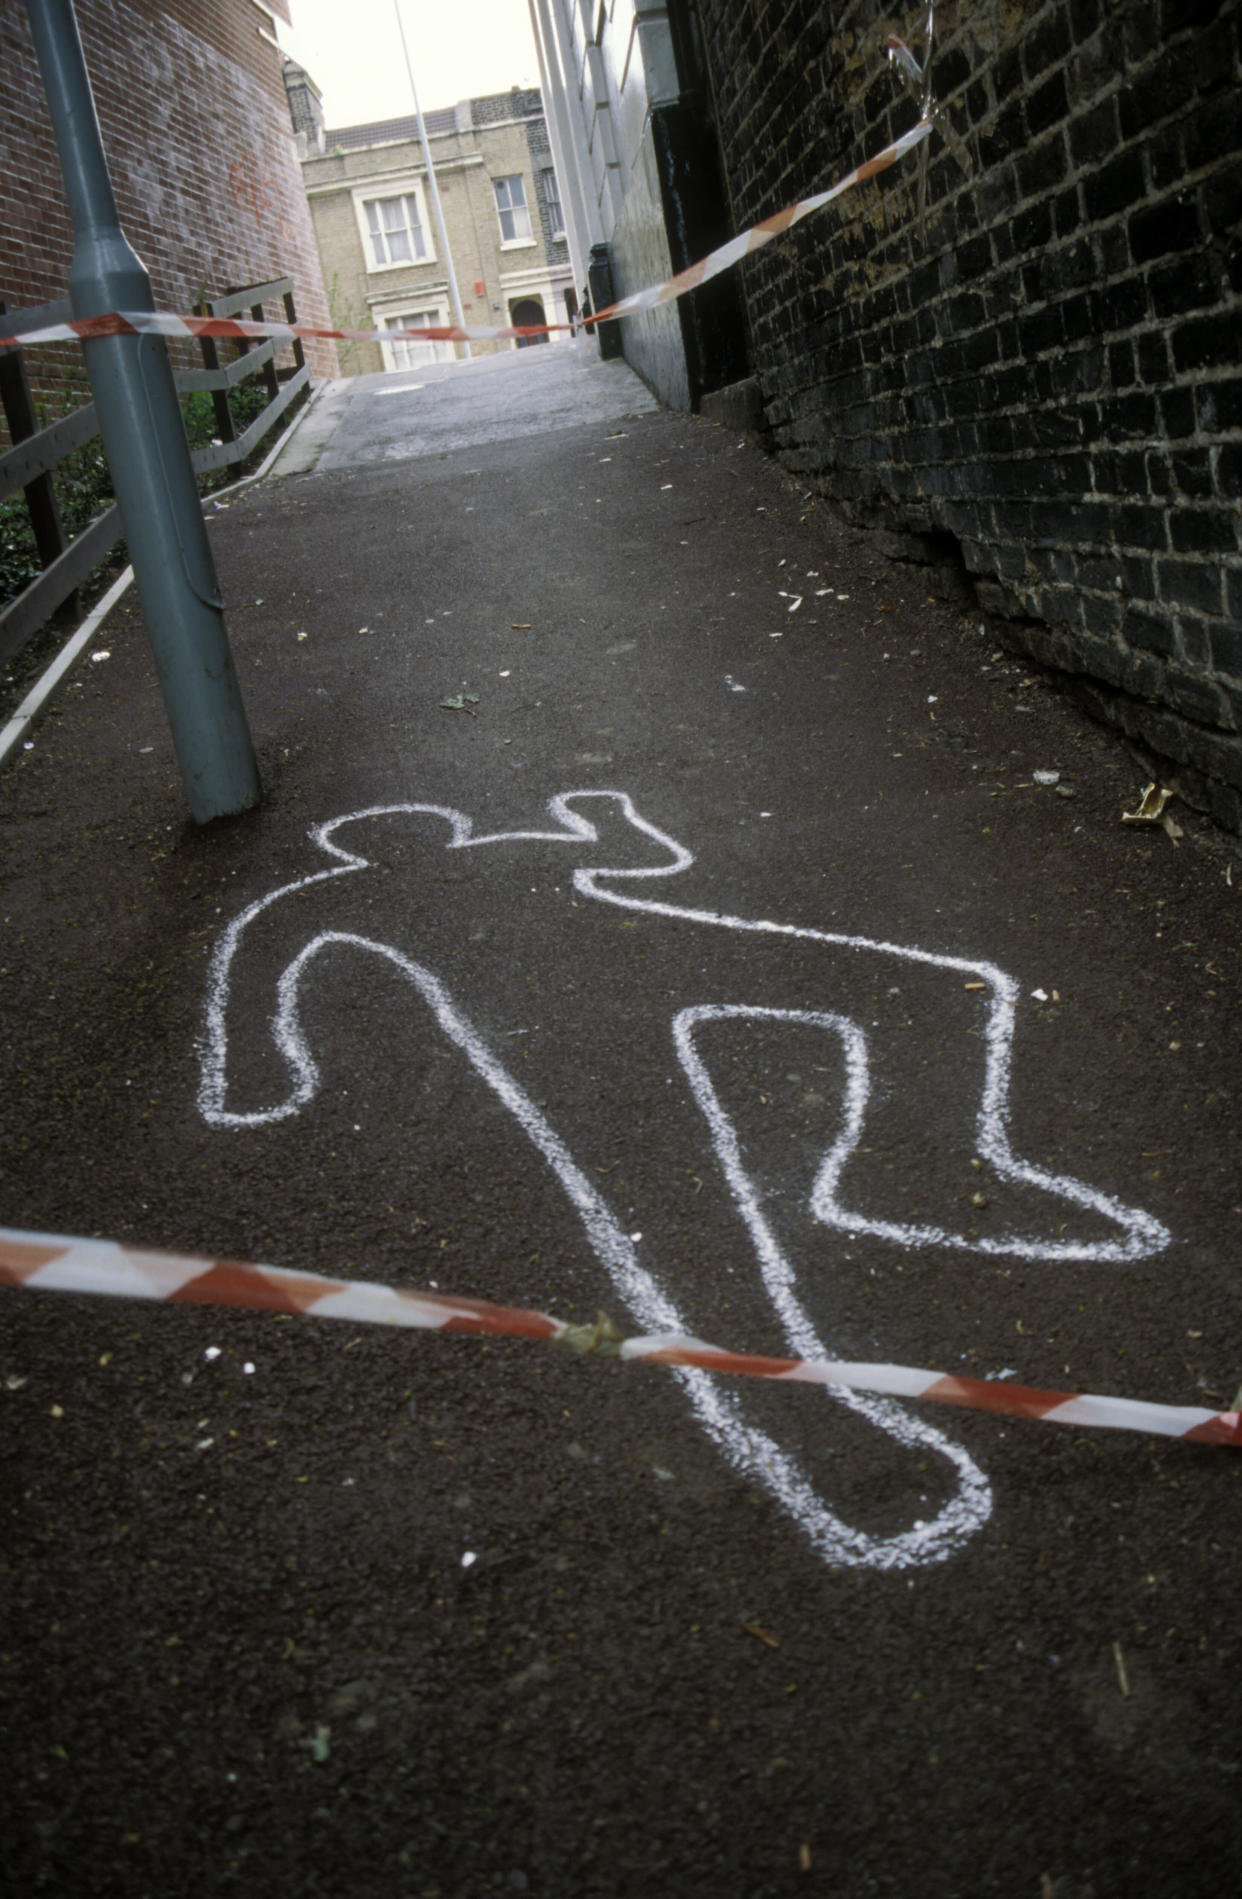 The police chalk outline of a murder victim (Photo by: Photofusion/UIG via Getty Images)